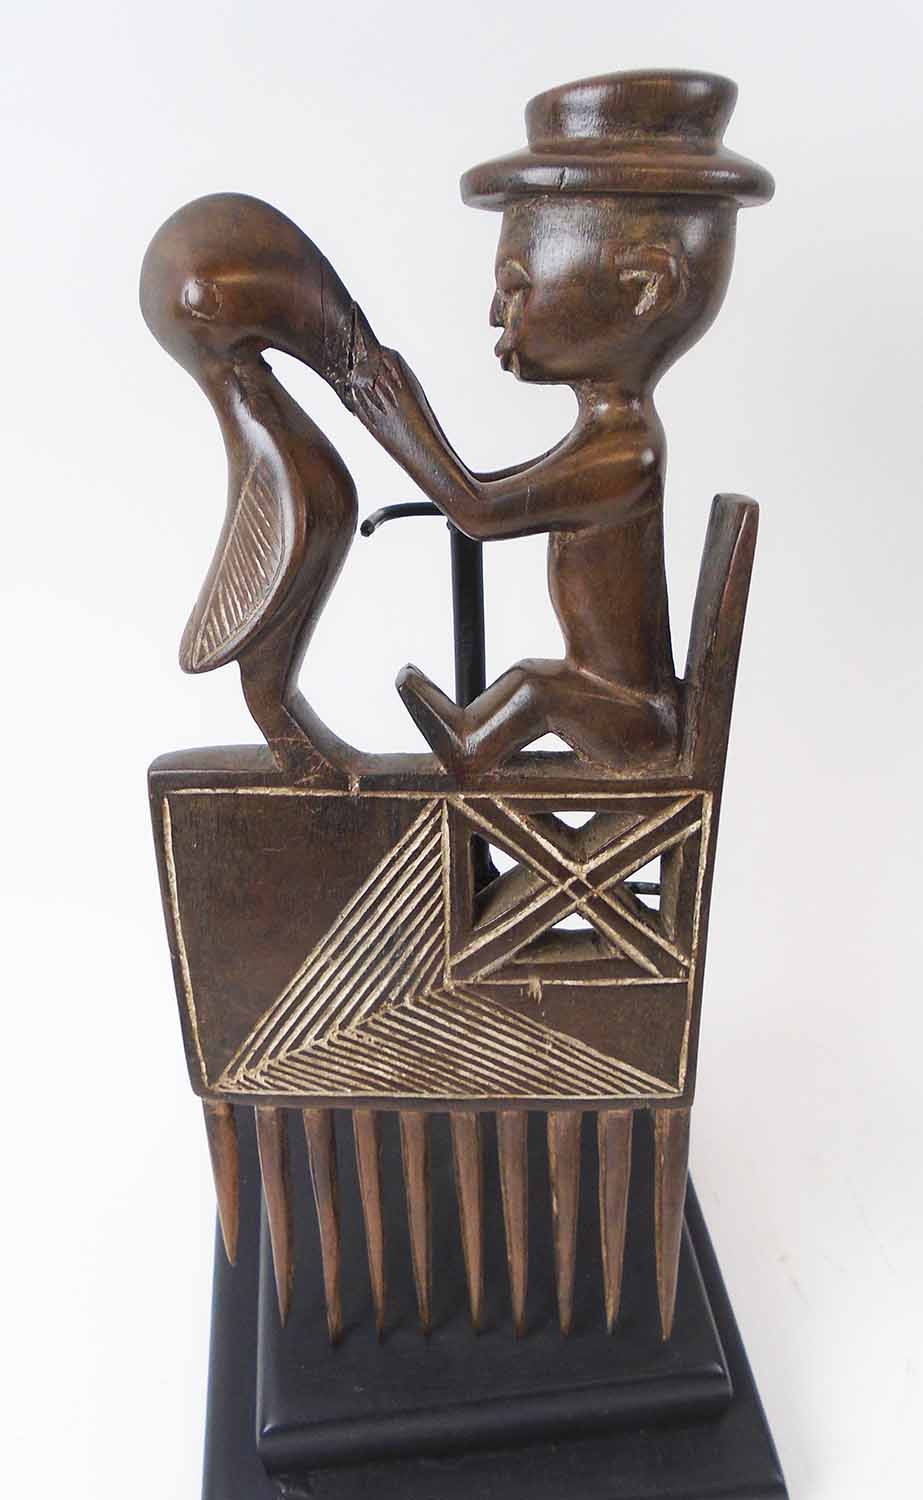 FOUR VARIOUS DECORATIVE COMBS, Cote d'Ivoire, carved wood, each approx. 27cm H, plus display stands. - Image 4 of 5